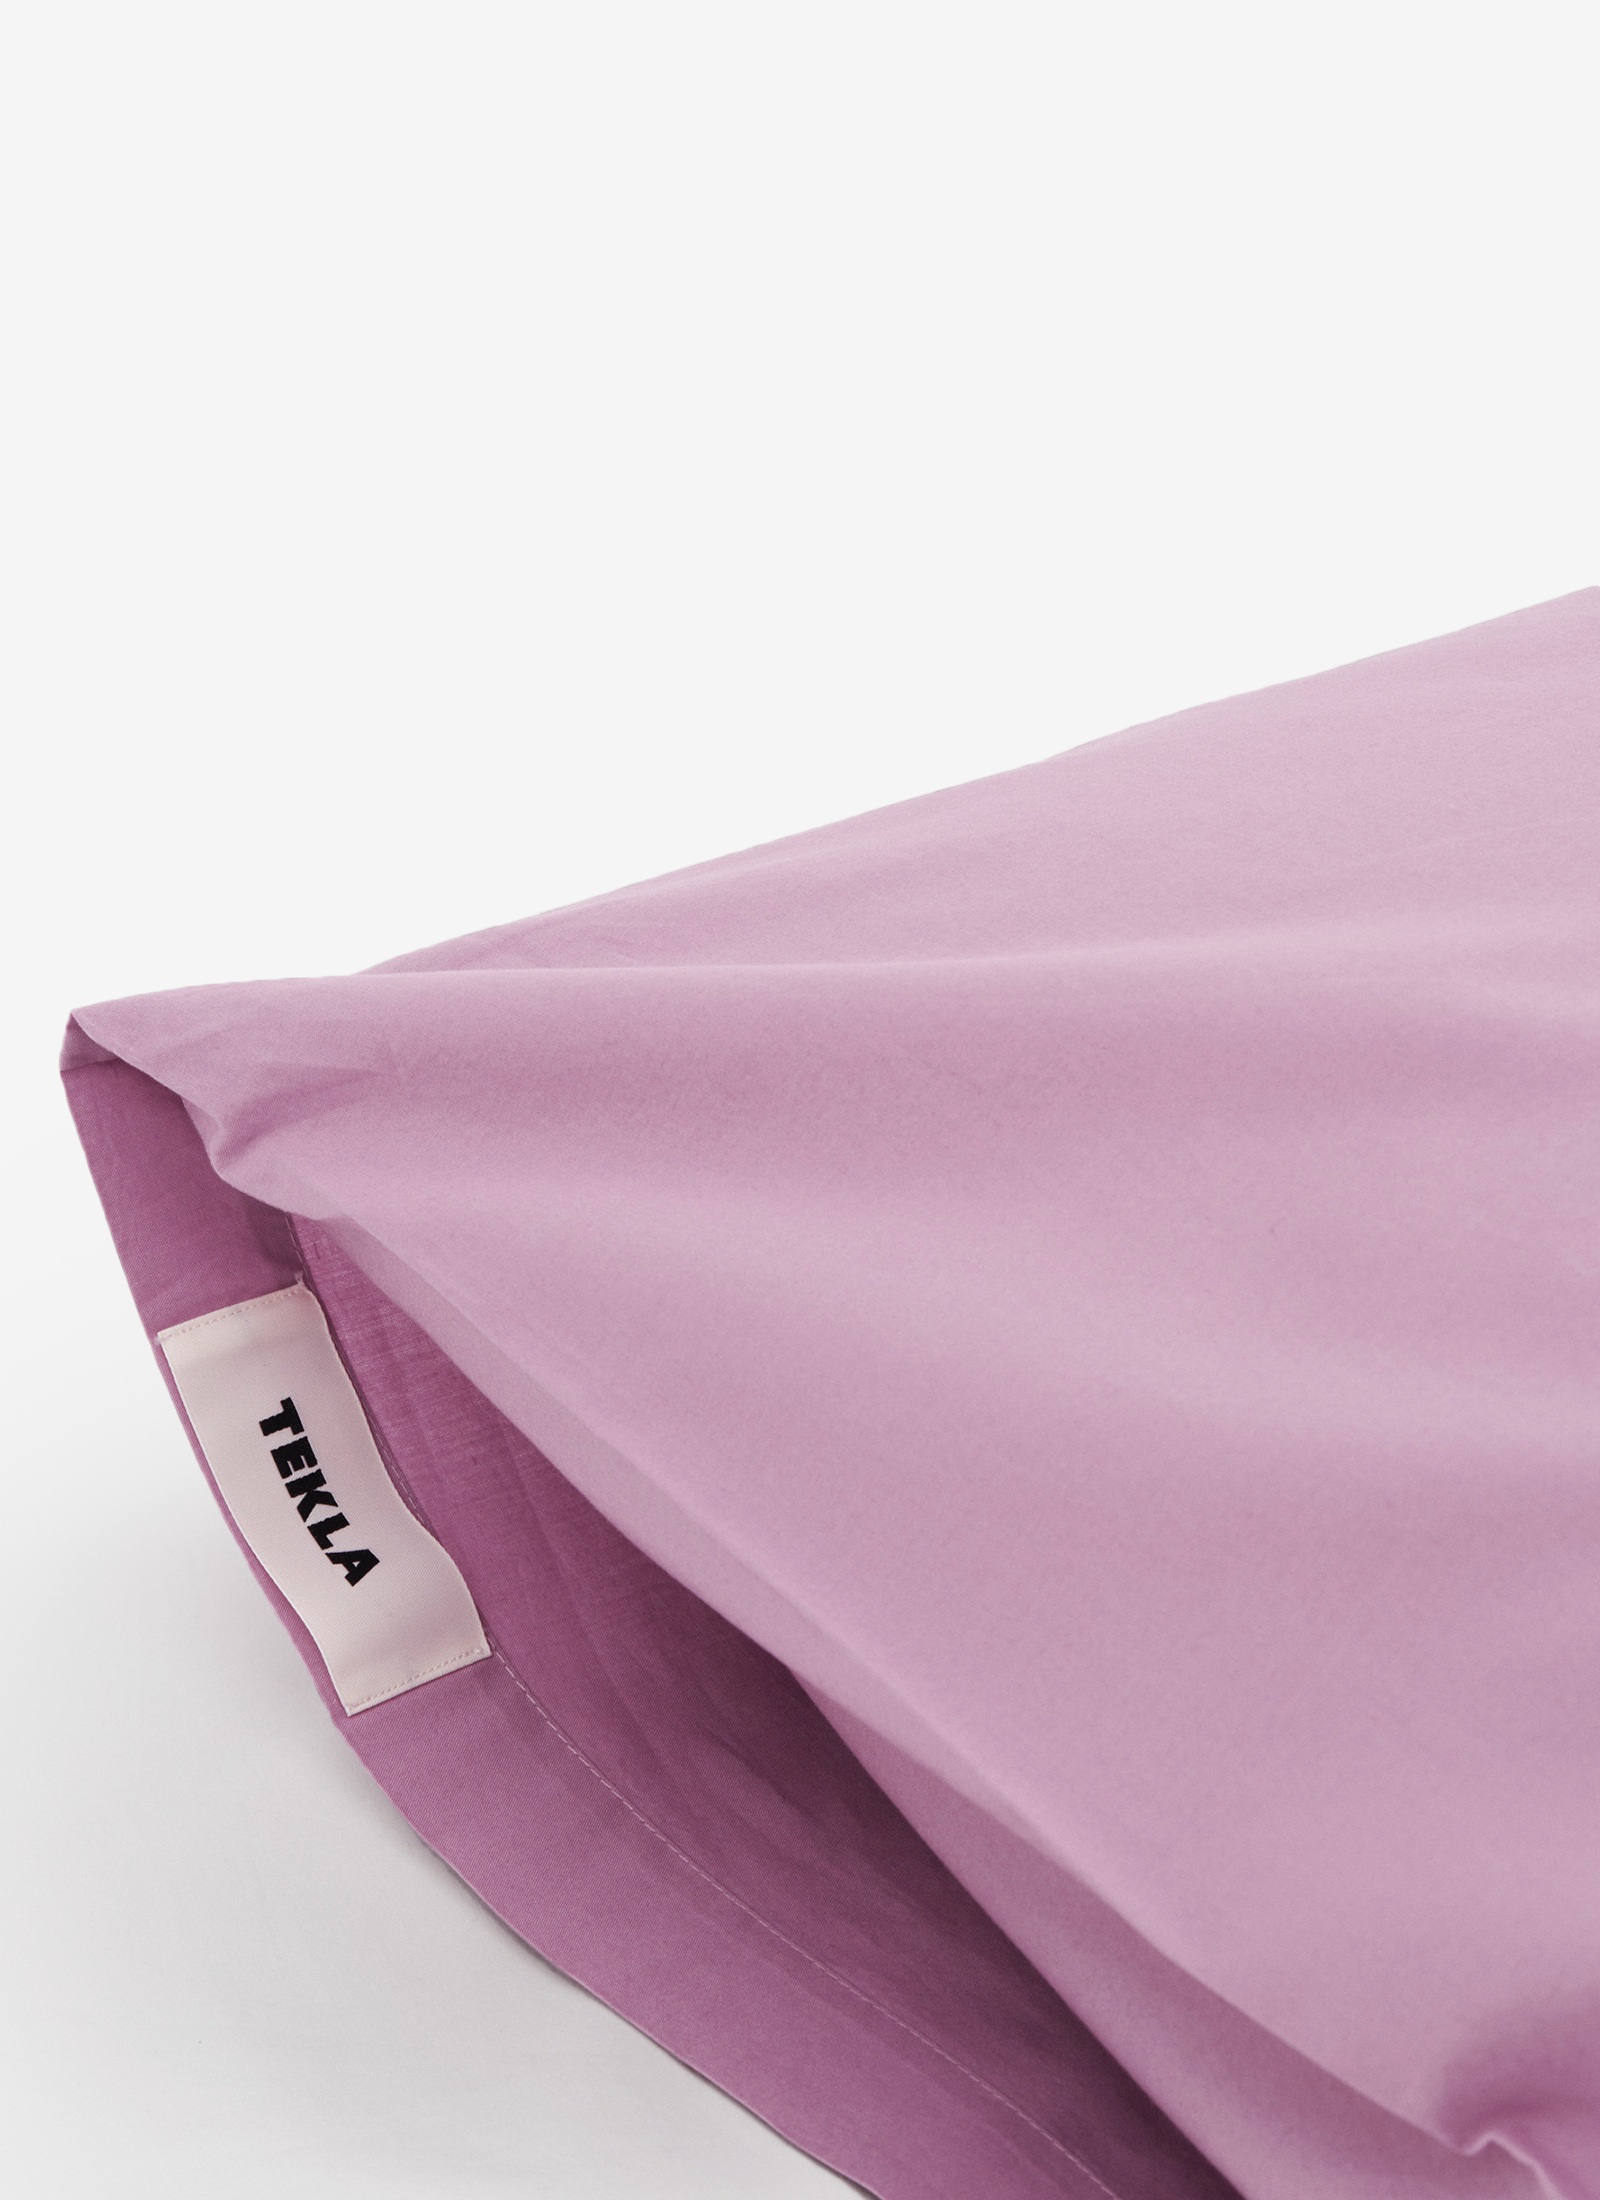 Pillowcases in Mallow Pink - Pair